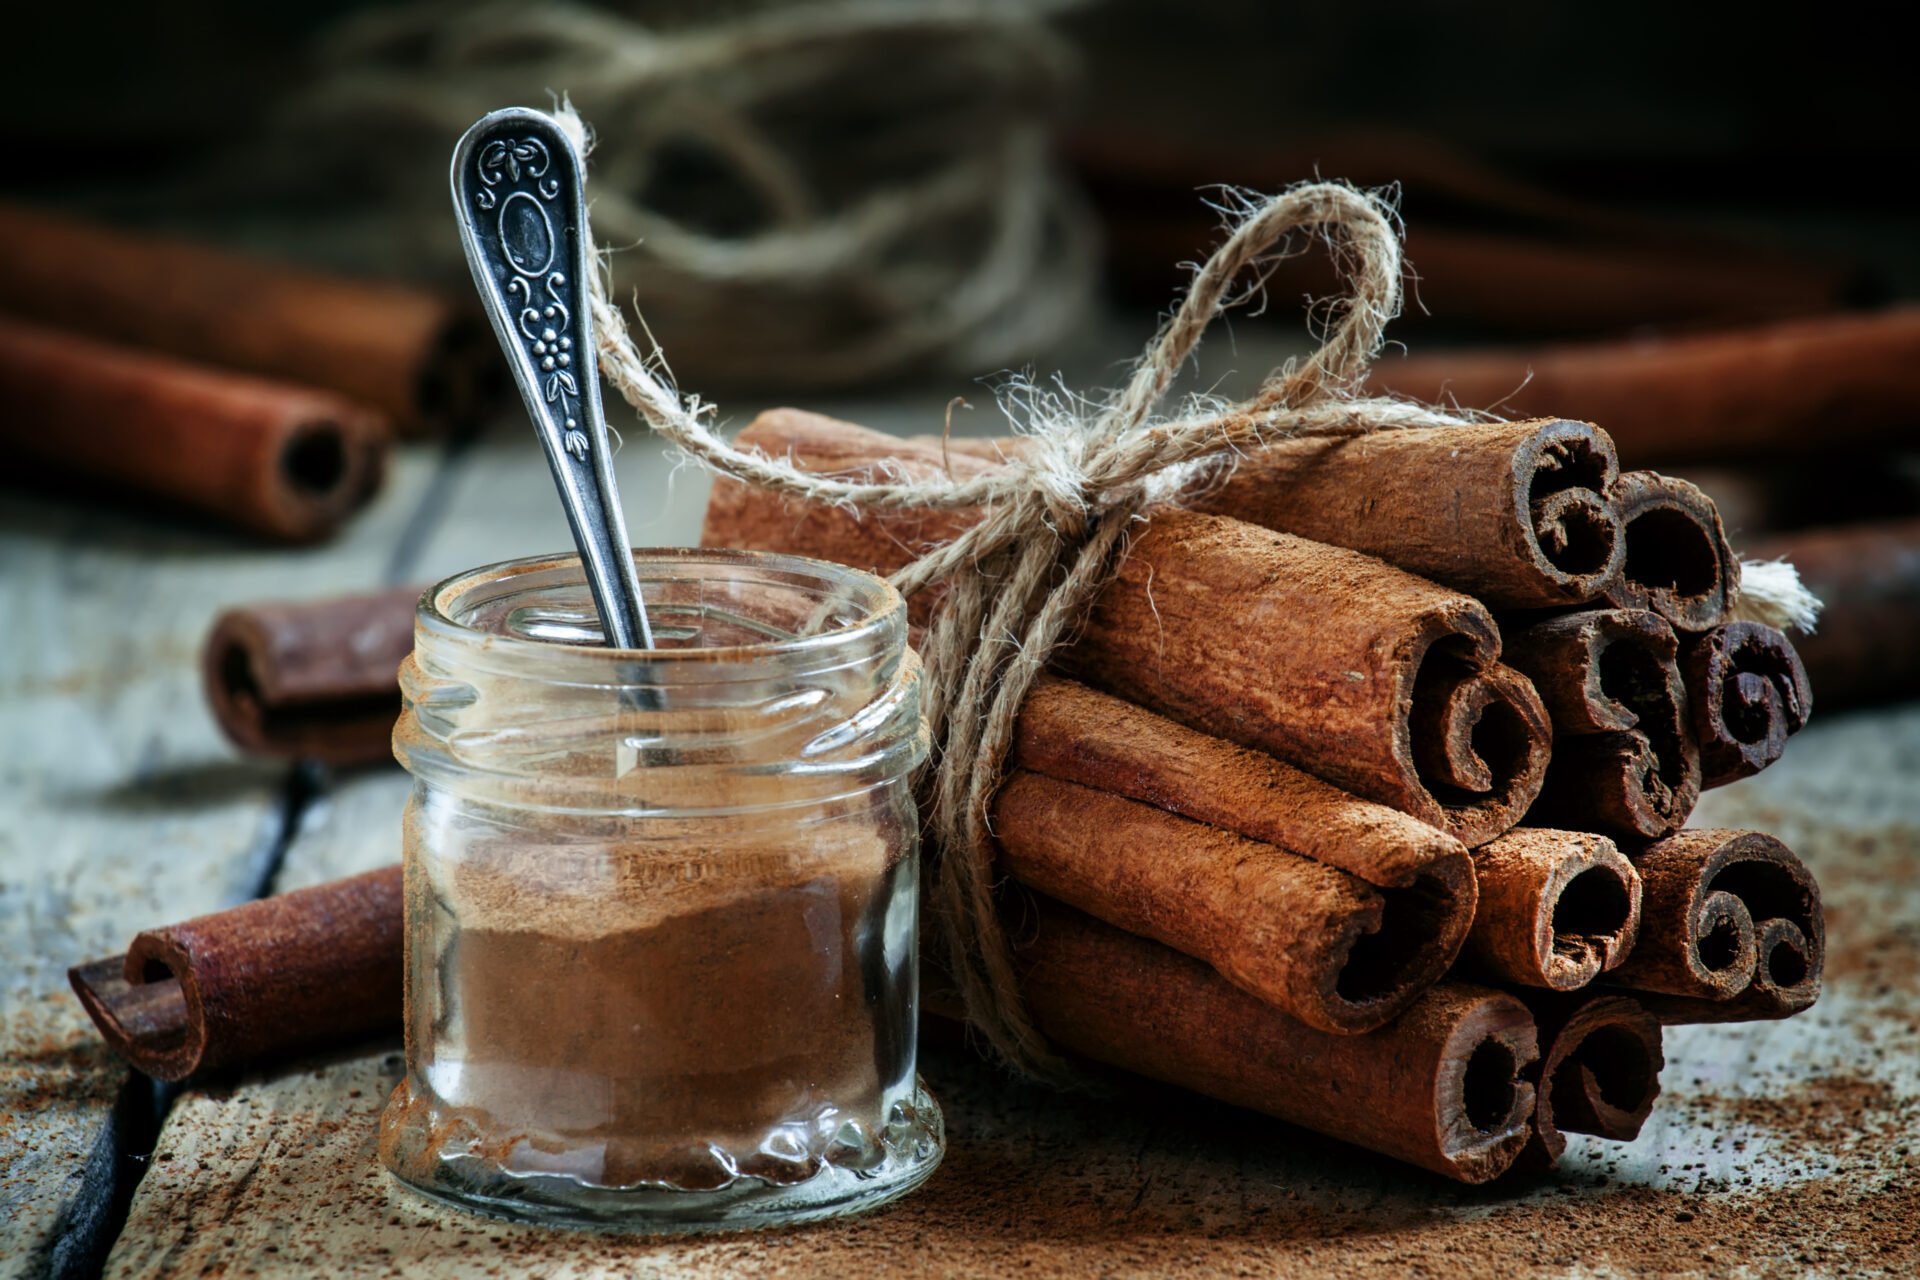 Ground cinnamon, cinnamon sticks, tied with jute rope on old wooden background in rustic style, selective focus